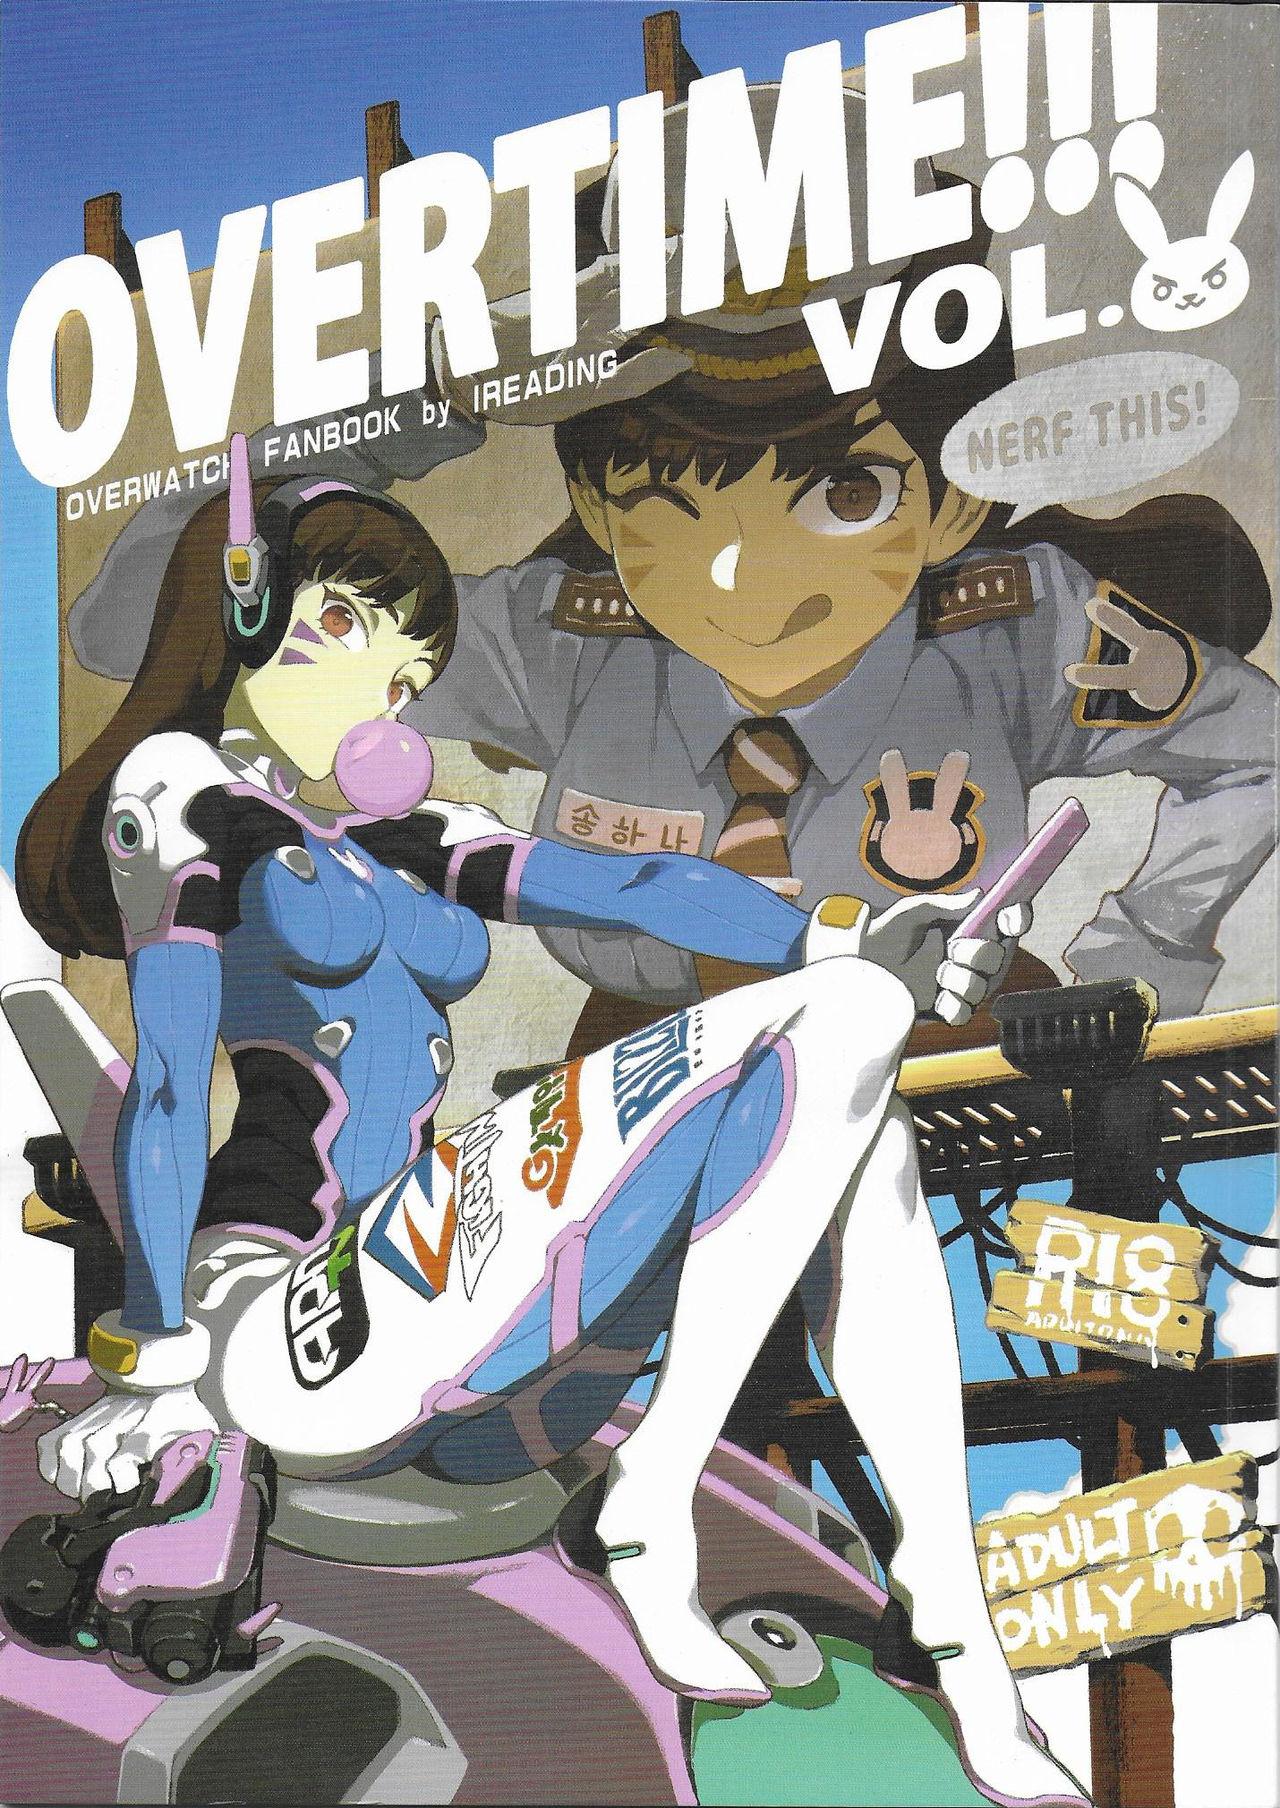 Huge Tits OVERTIME!! OVERWATCH FANBOOK VOL. 2 - Overwatch Transexual - Picture 1